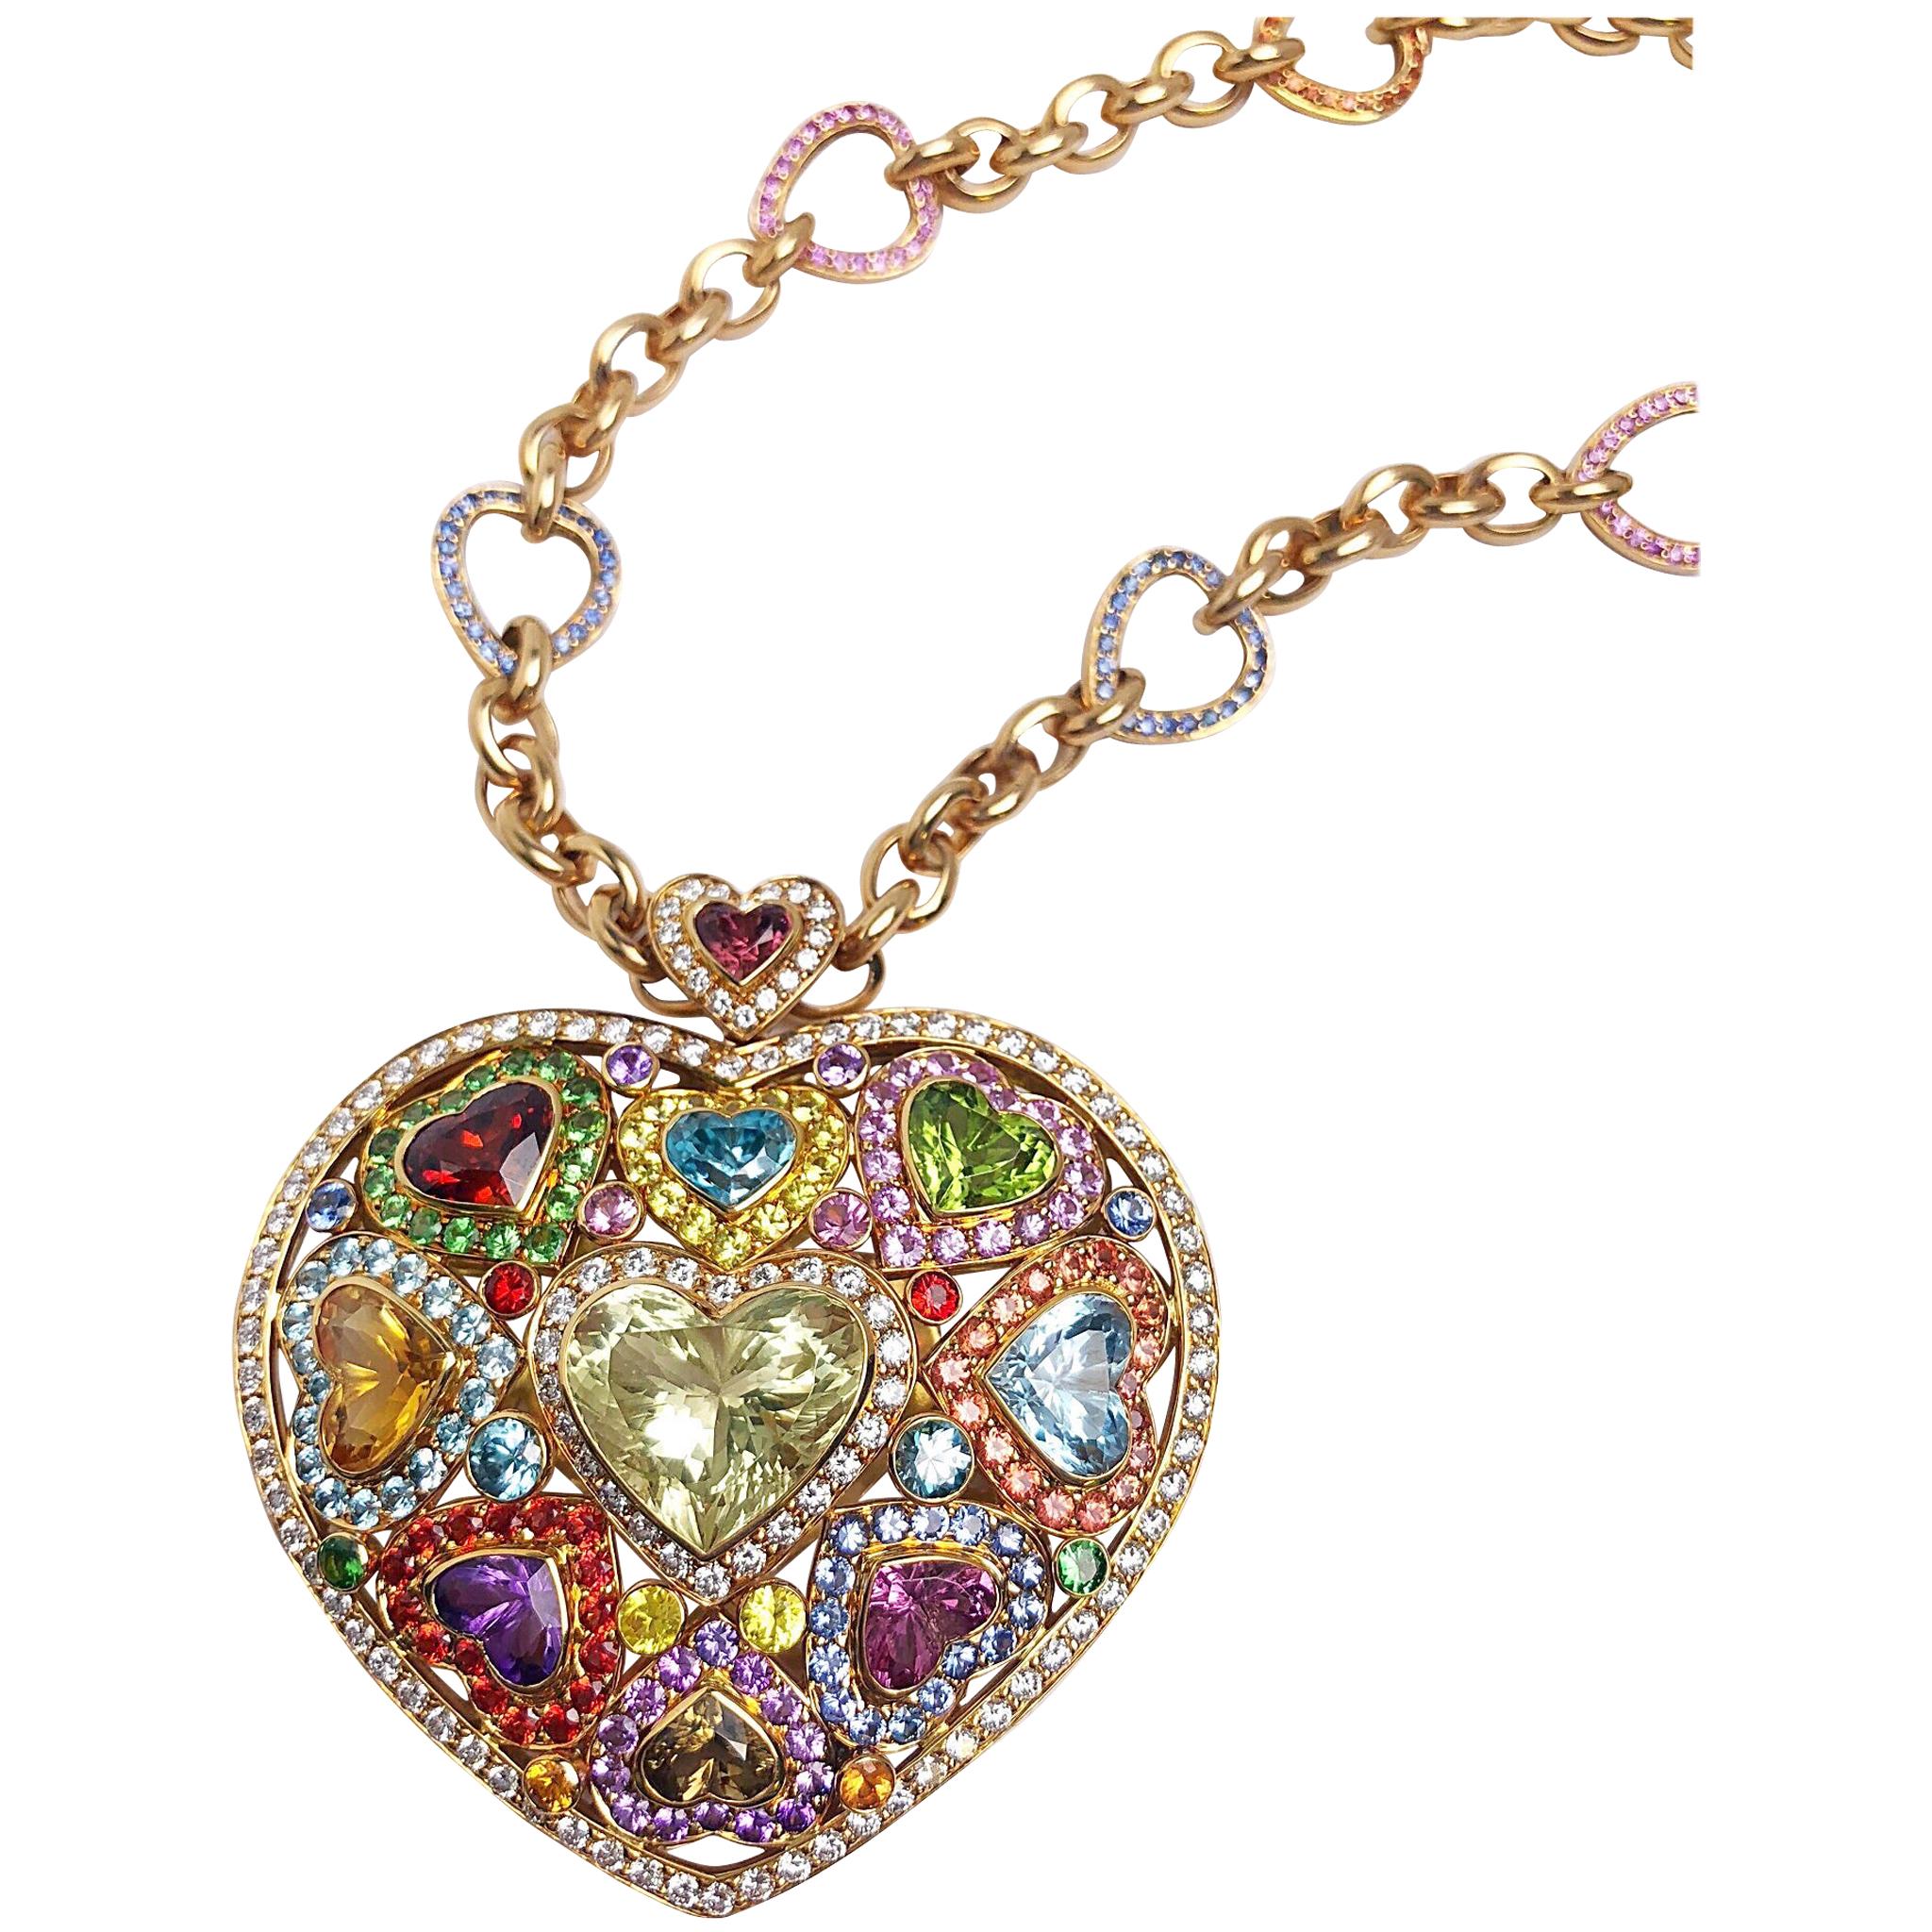 18 Karat Gold and Semiprecious Heart Necklace with 15.94 Multicolored Sapphires